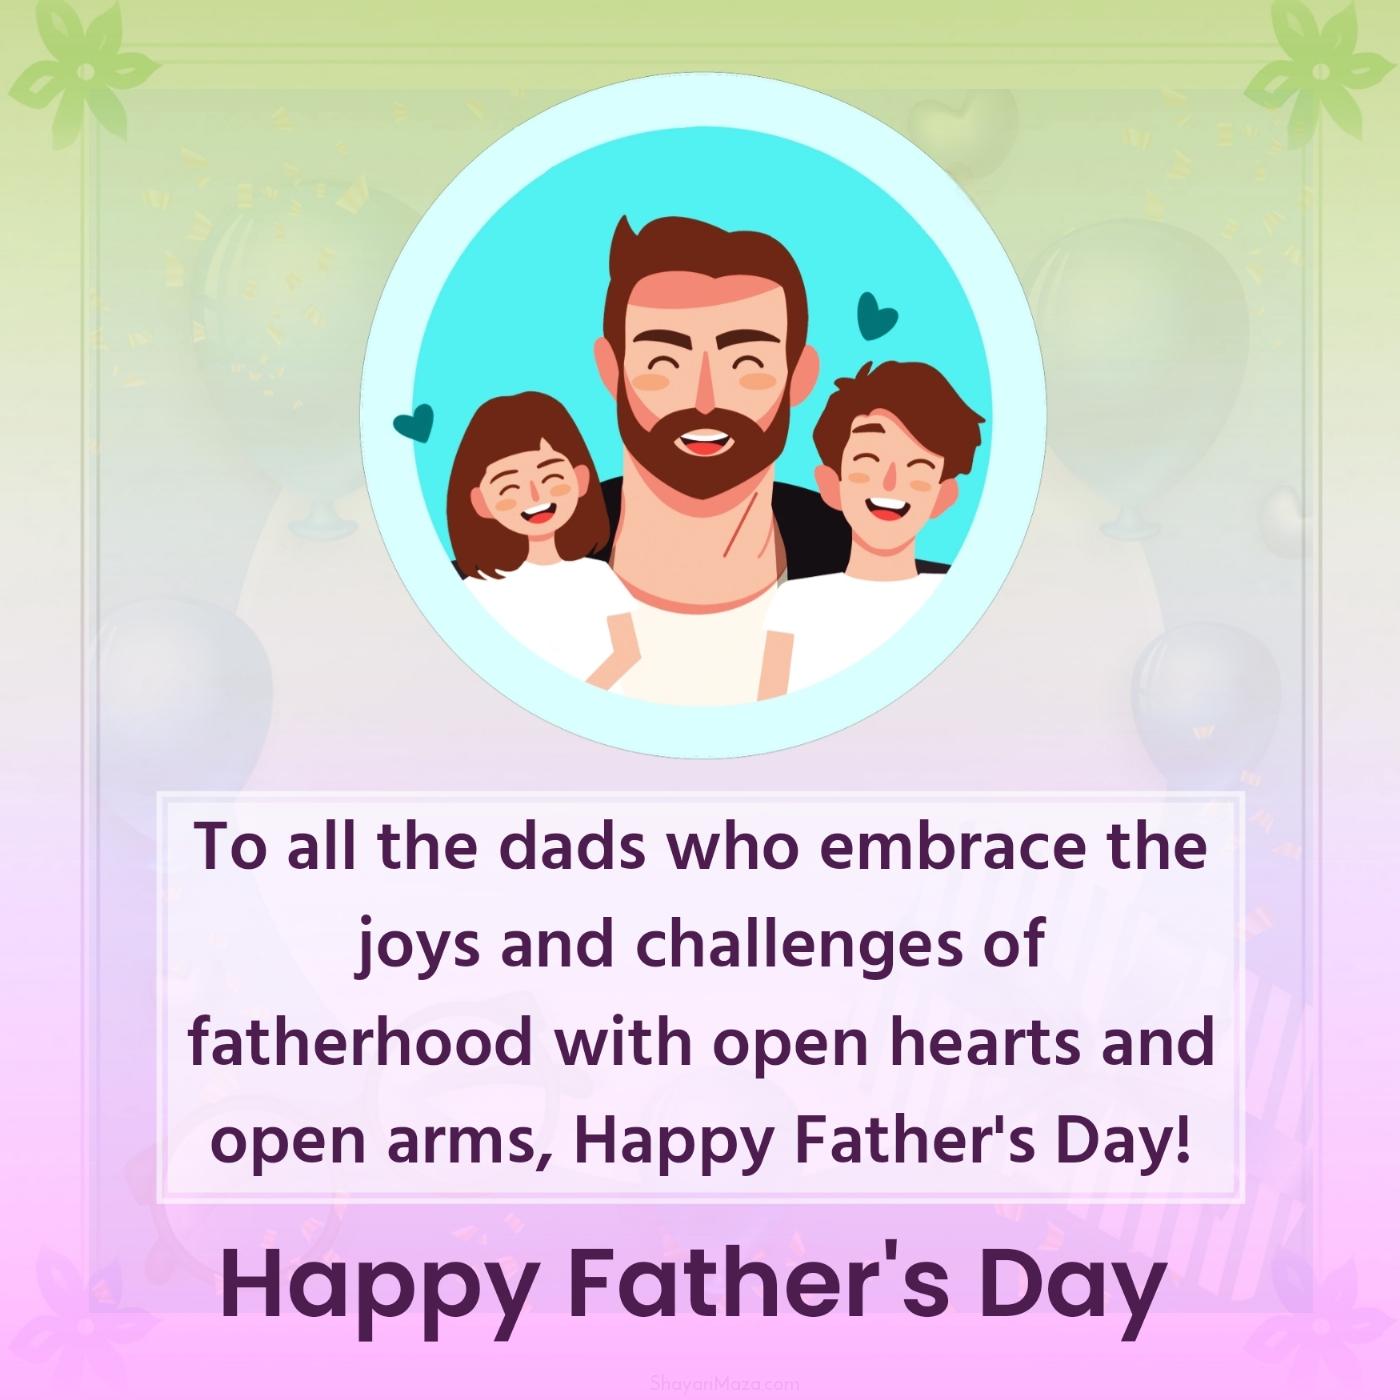 To all the dads who embrace the joys and challenges of fatherhood